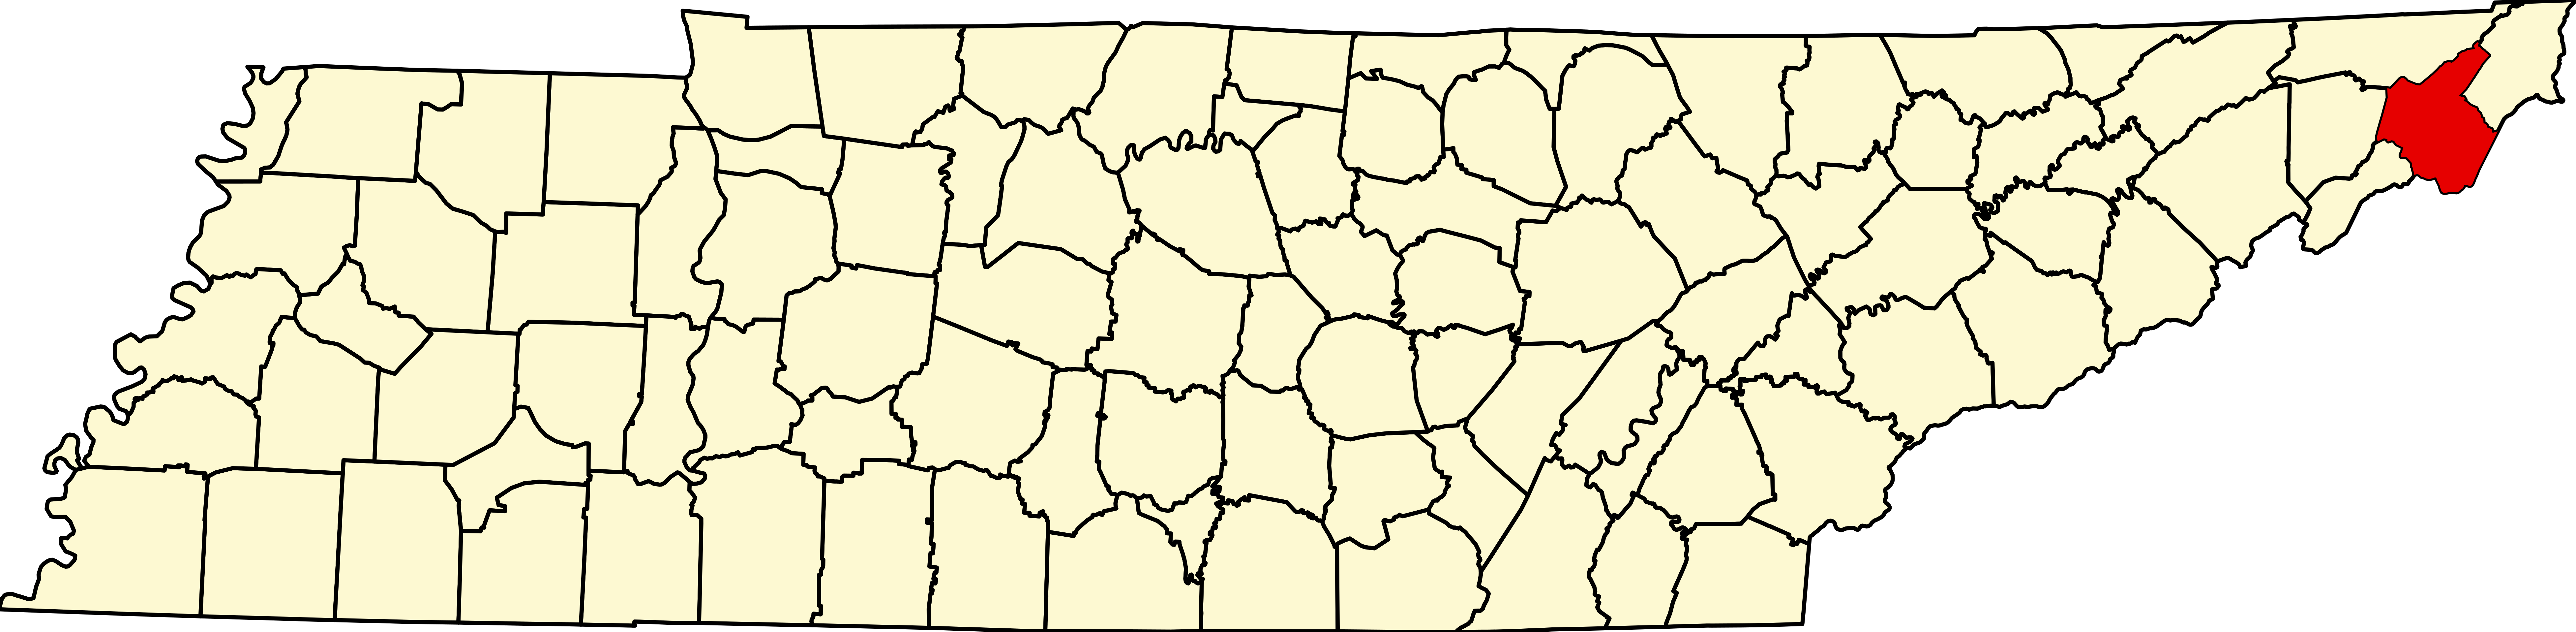 upload.wikimedia.org/wikipedia/commons/thumb/c/c0/Map_of_Tennessee_highlighting_Carter_County.svg/7814px-Map_of_Tennessee_highlighting_Carter_County.svg.png